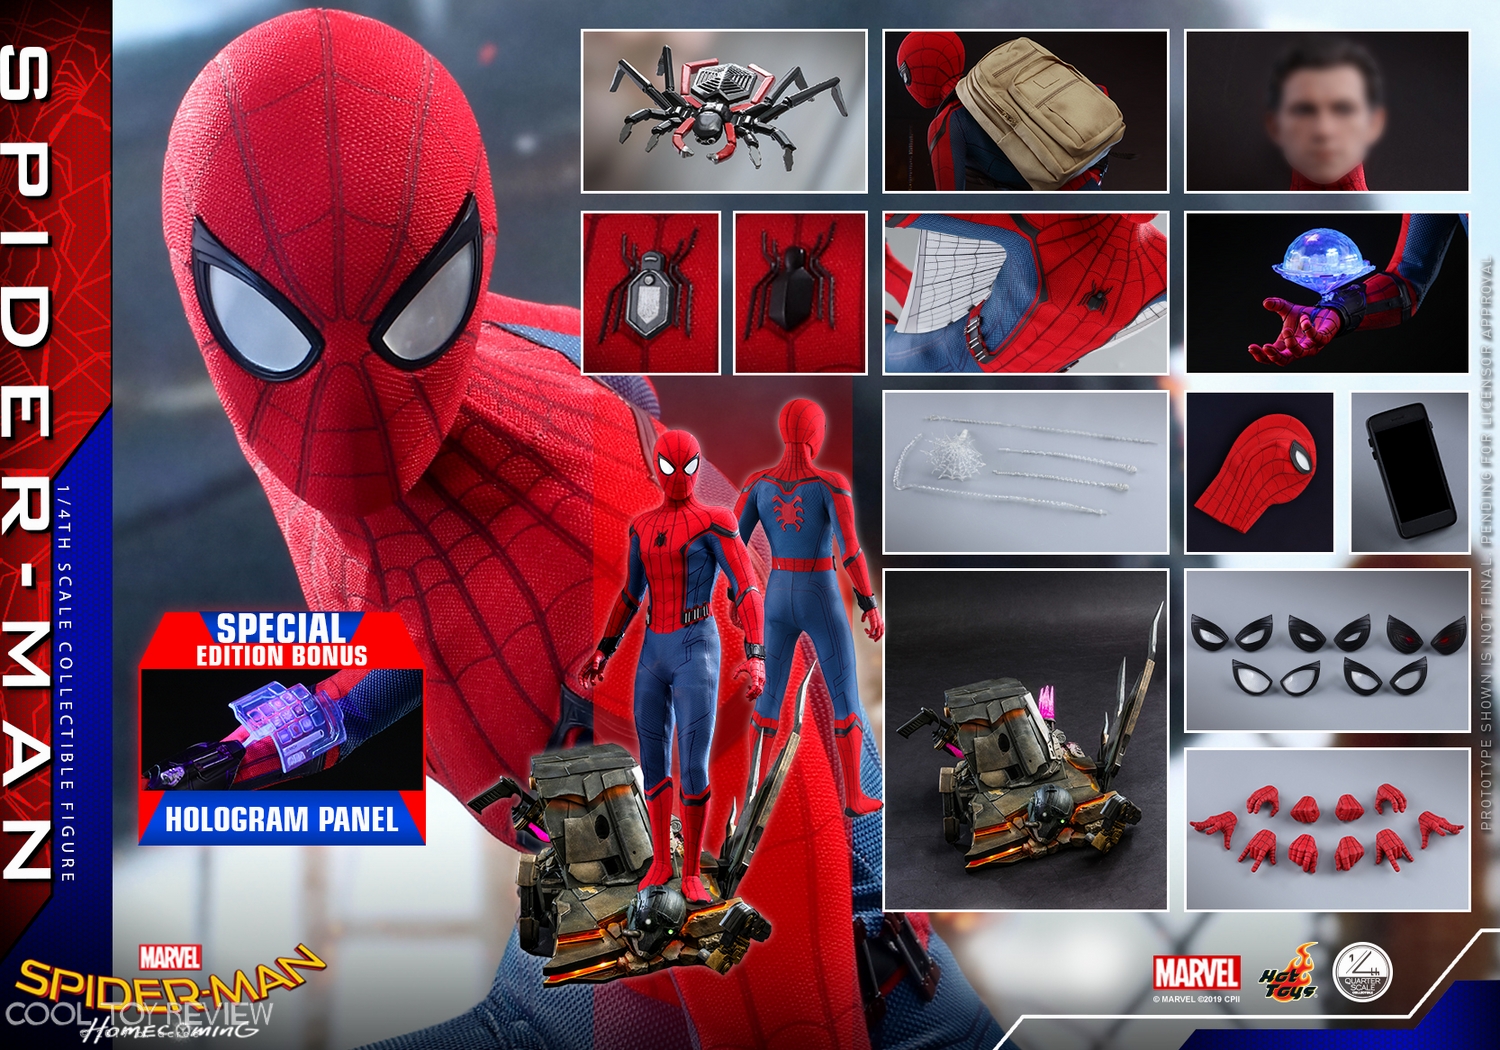 Hot Toys - SMHC - 1-4 Spider-Man collectible figure_PR17 (Special).jpg